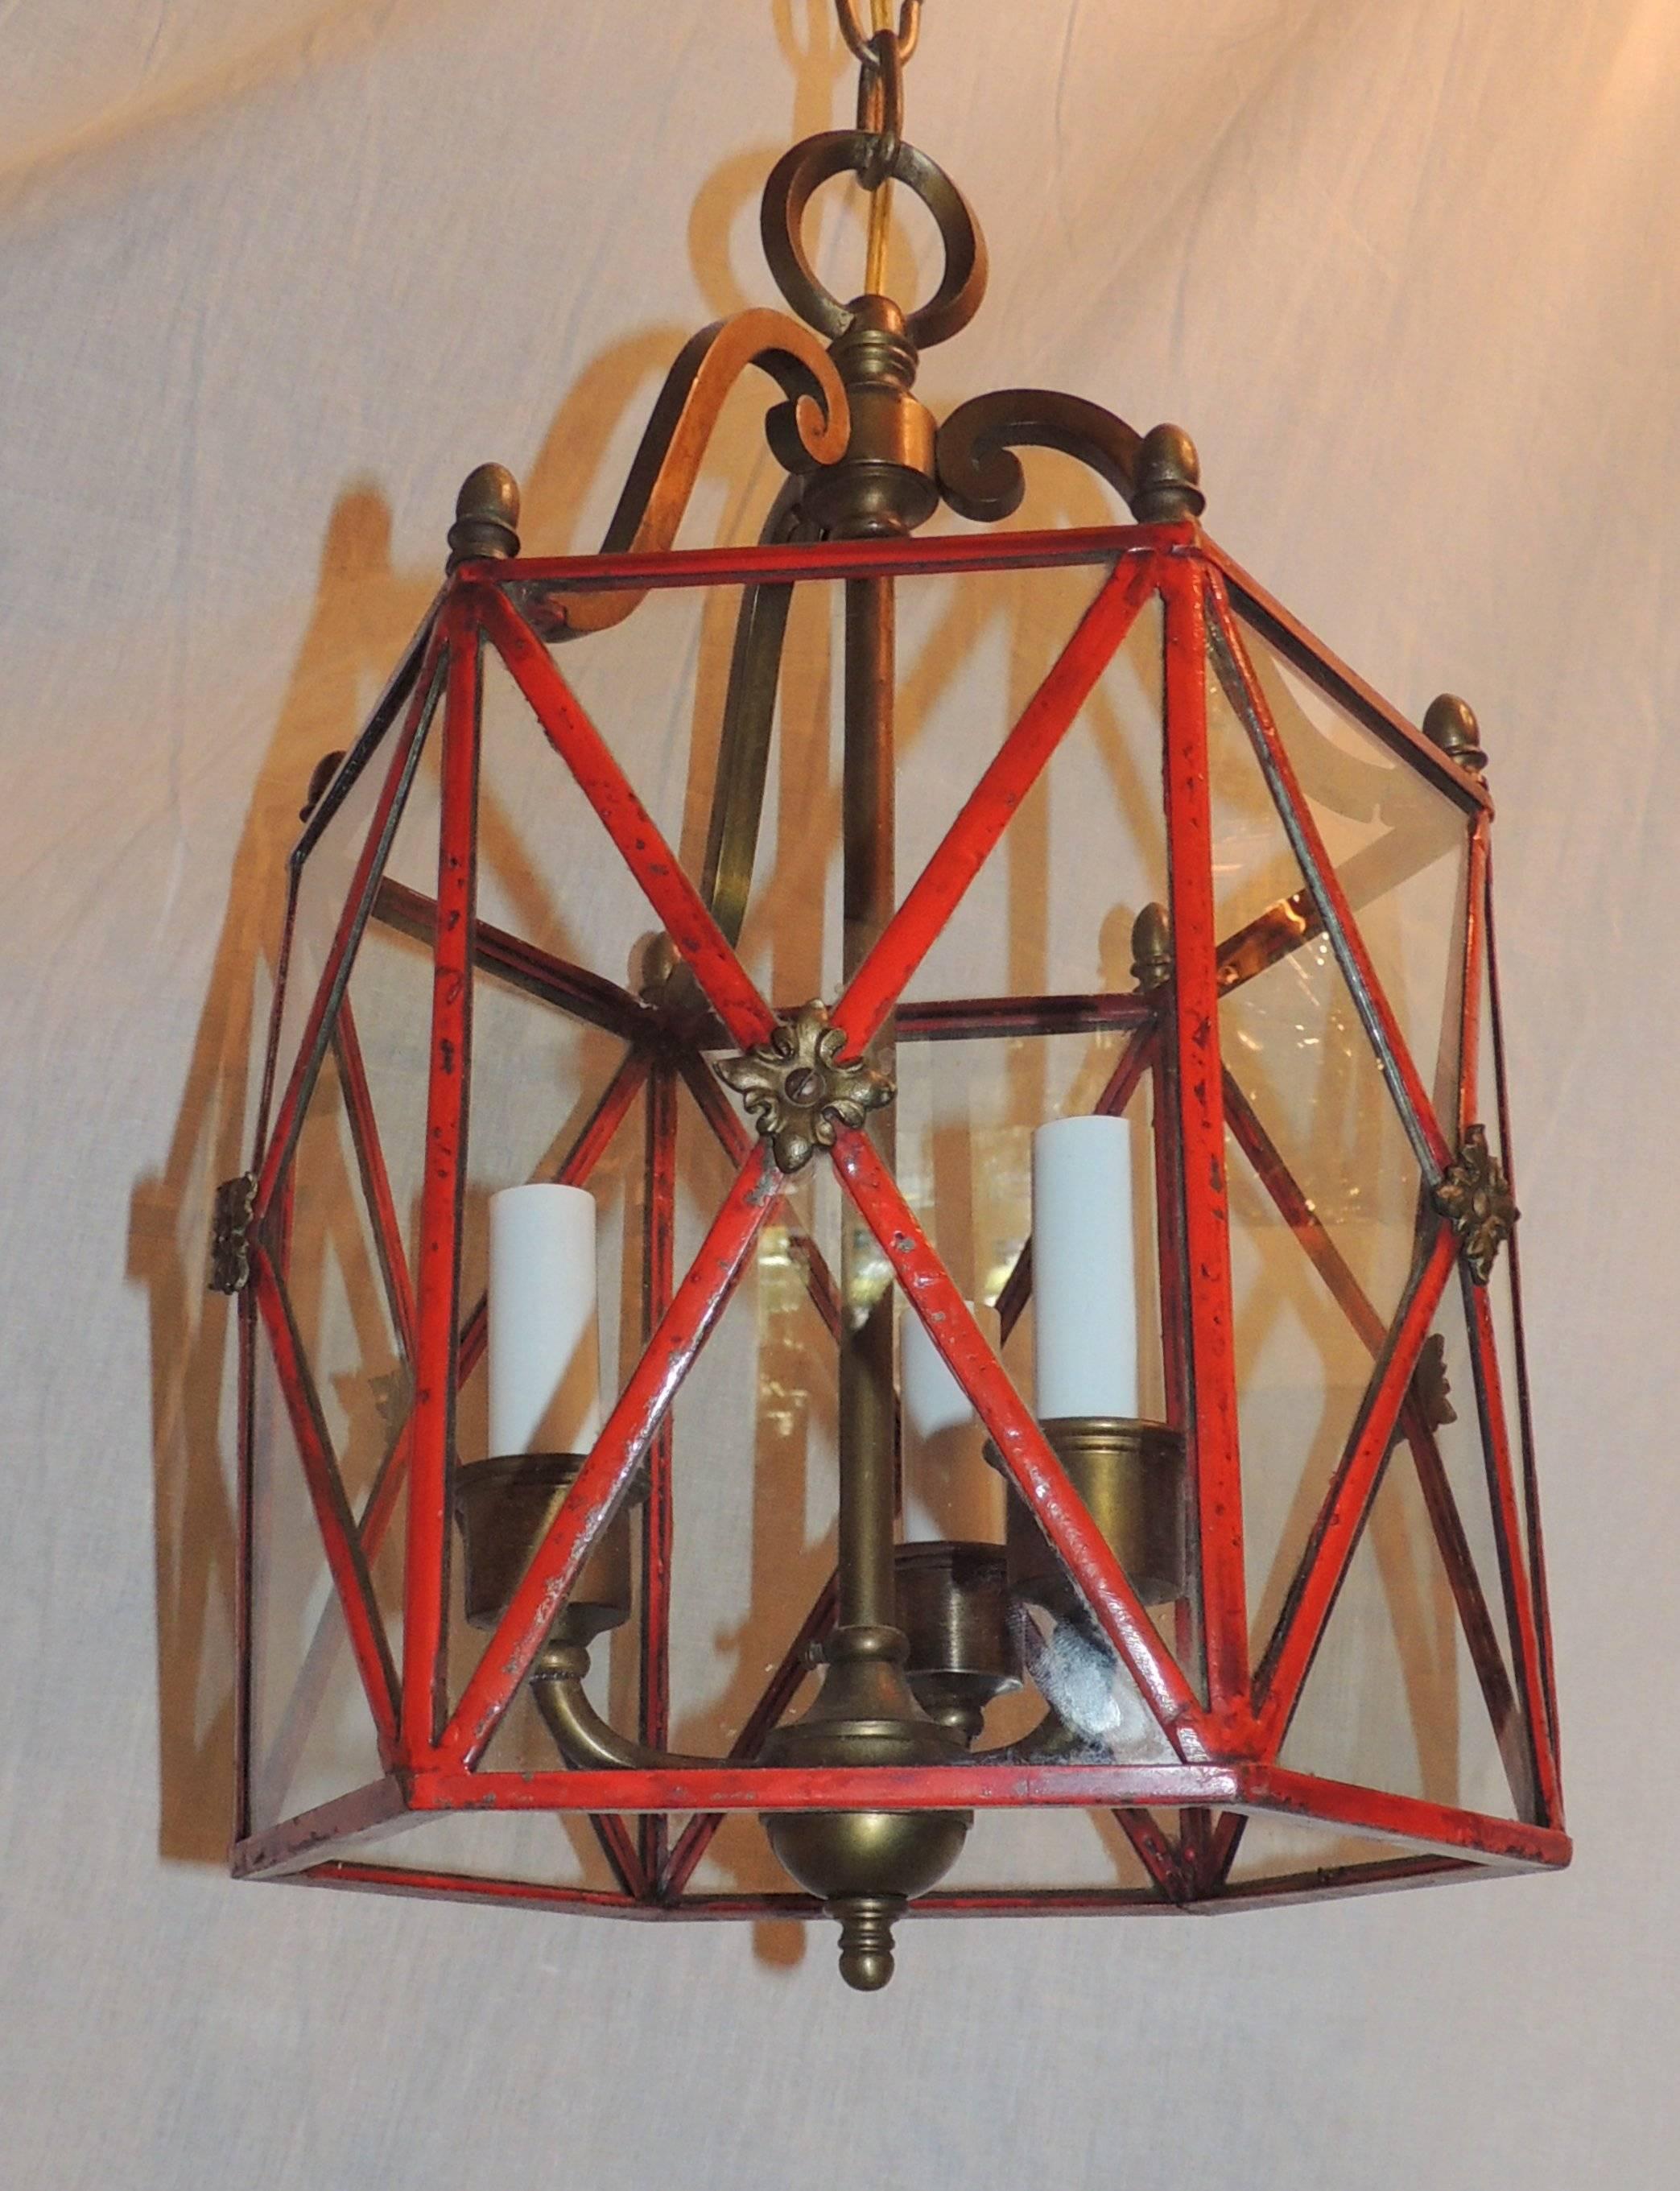 This wonderful petite three-light lantern is in a hexagon shape with glass panels, the sides bowed out accented with bronze floral accents. 
Completely rewired and ready to install.

Measures: 9" W x 16" H.